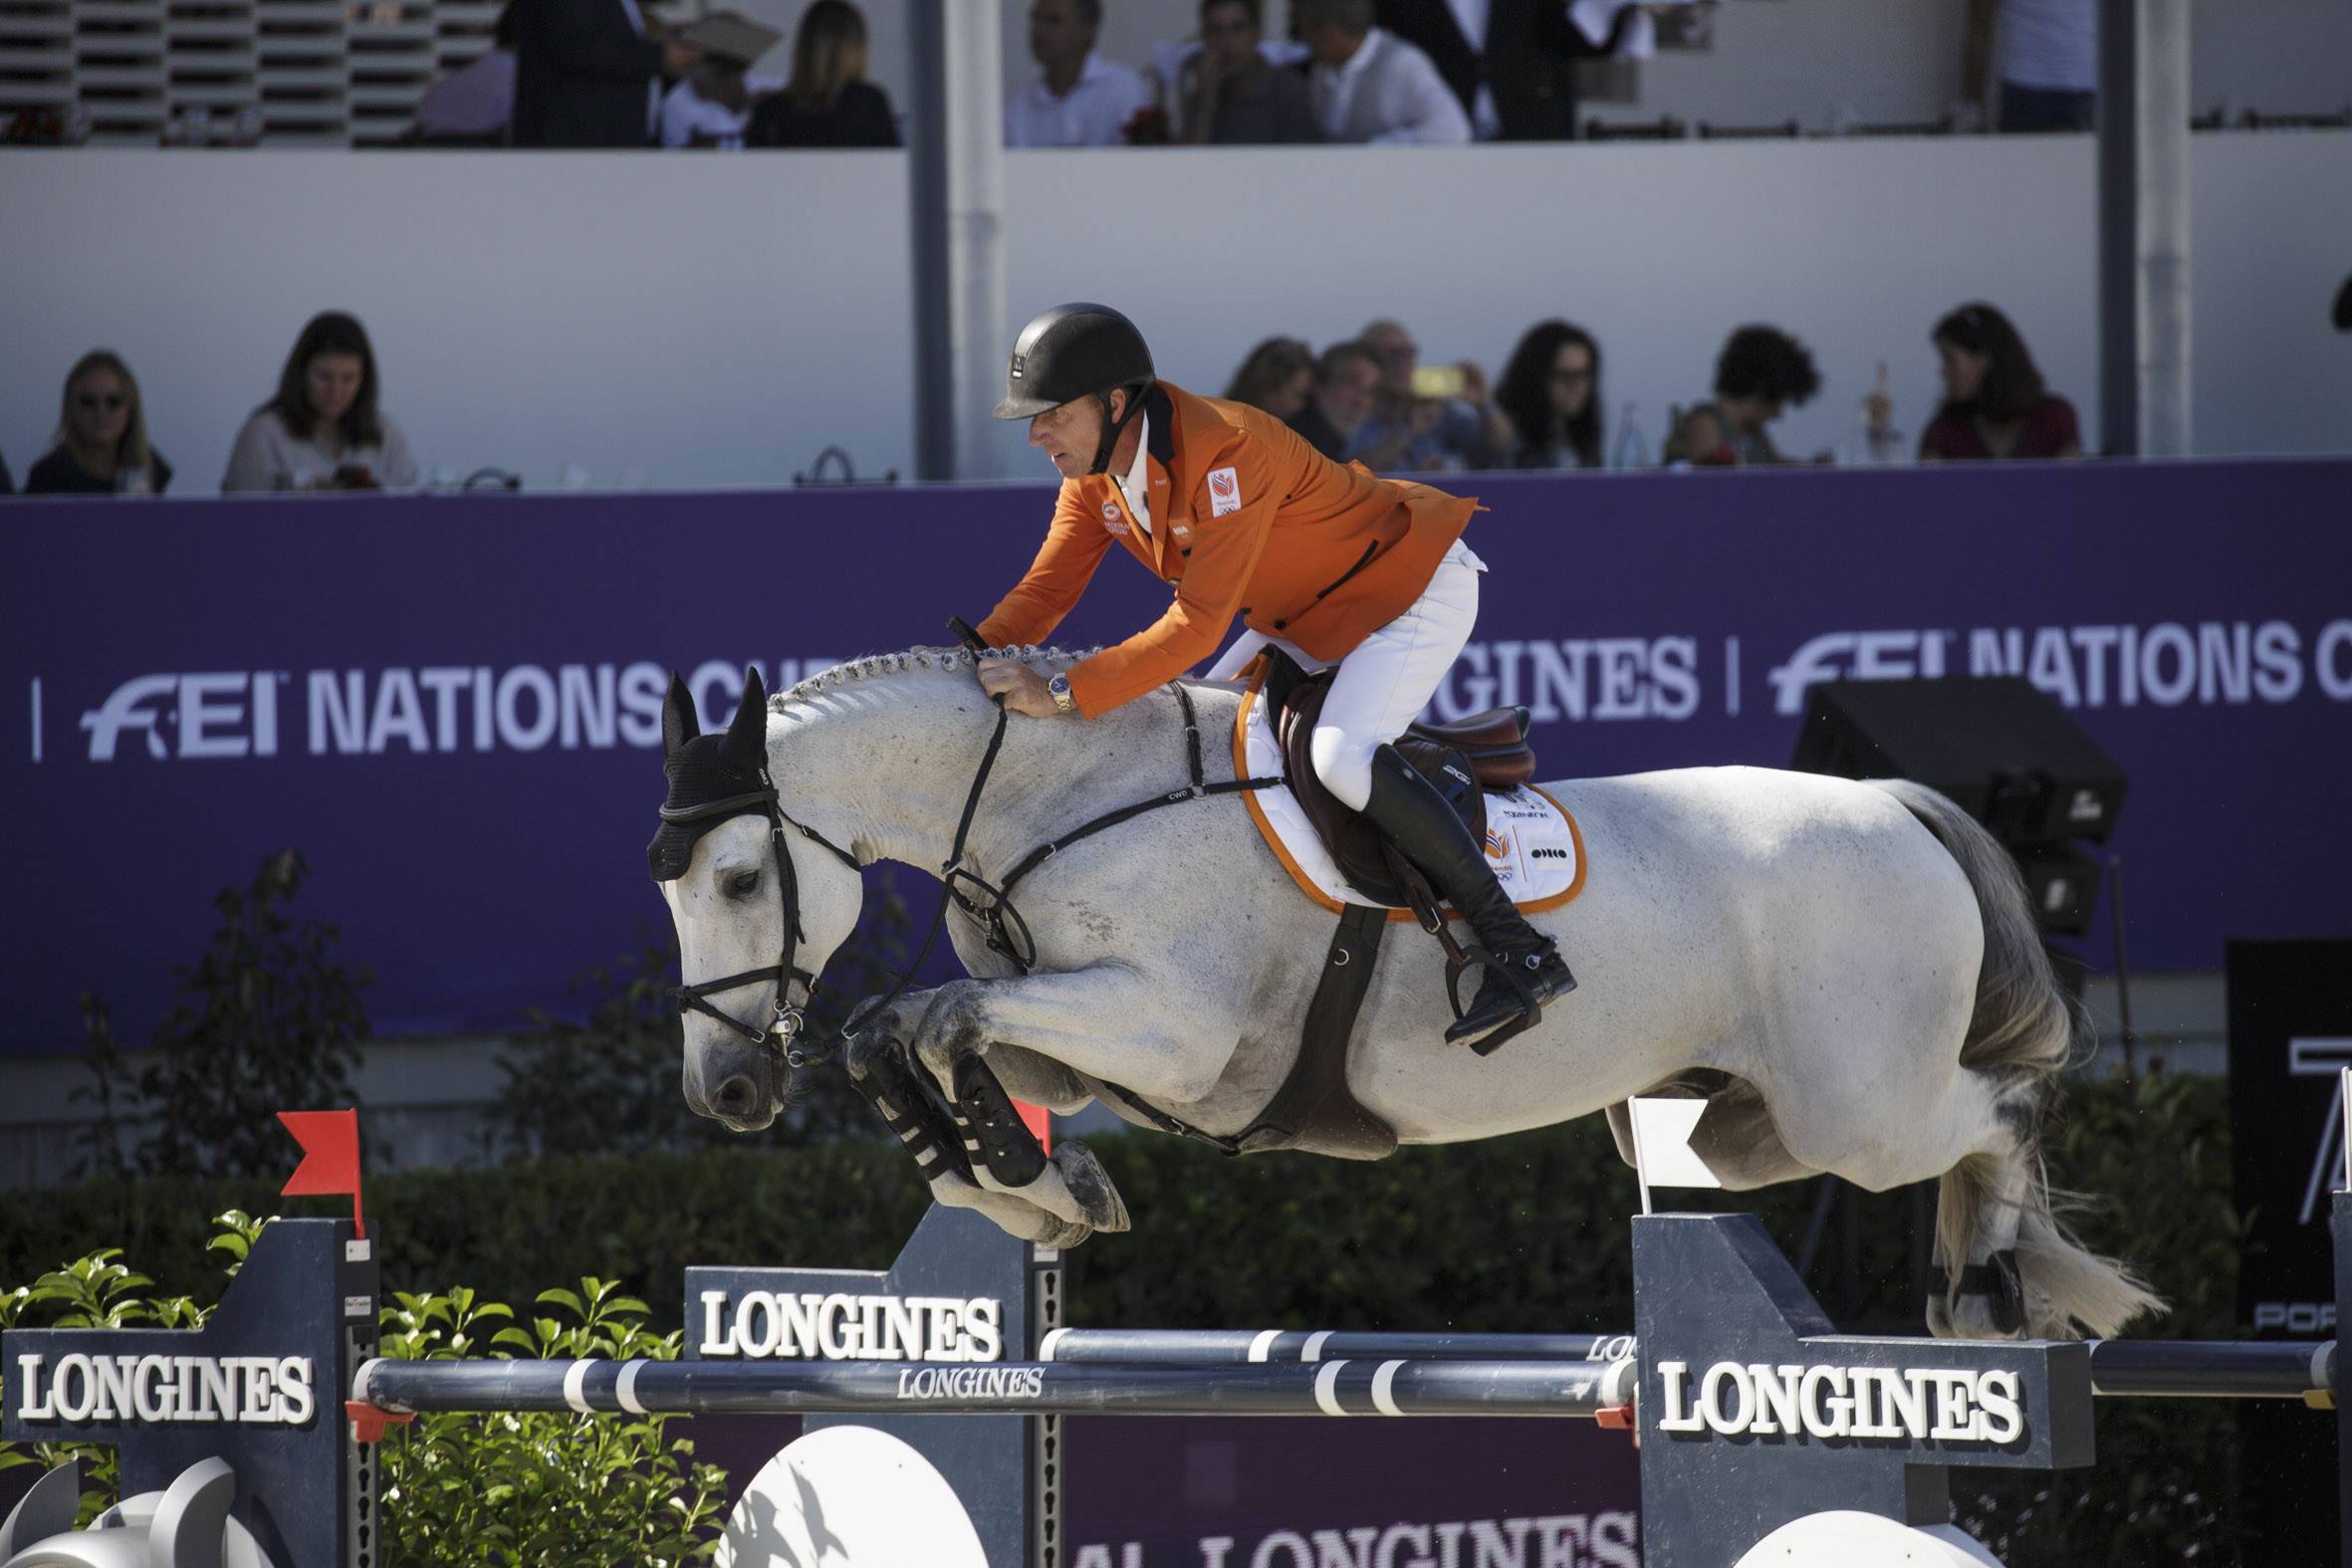 Top 10 teams confirmed for jumping's Longines League of NationsTM